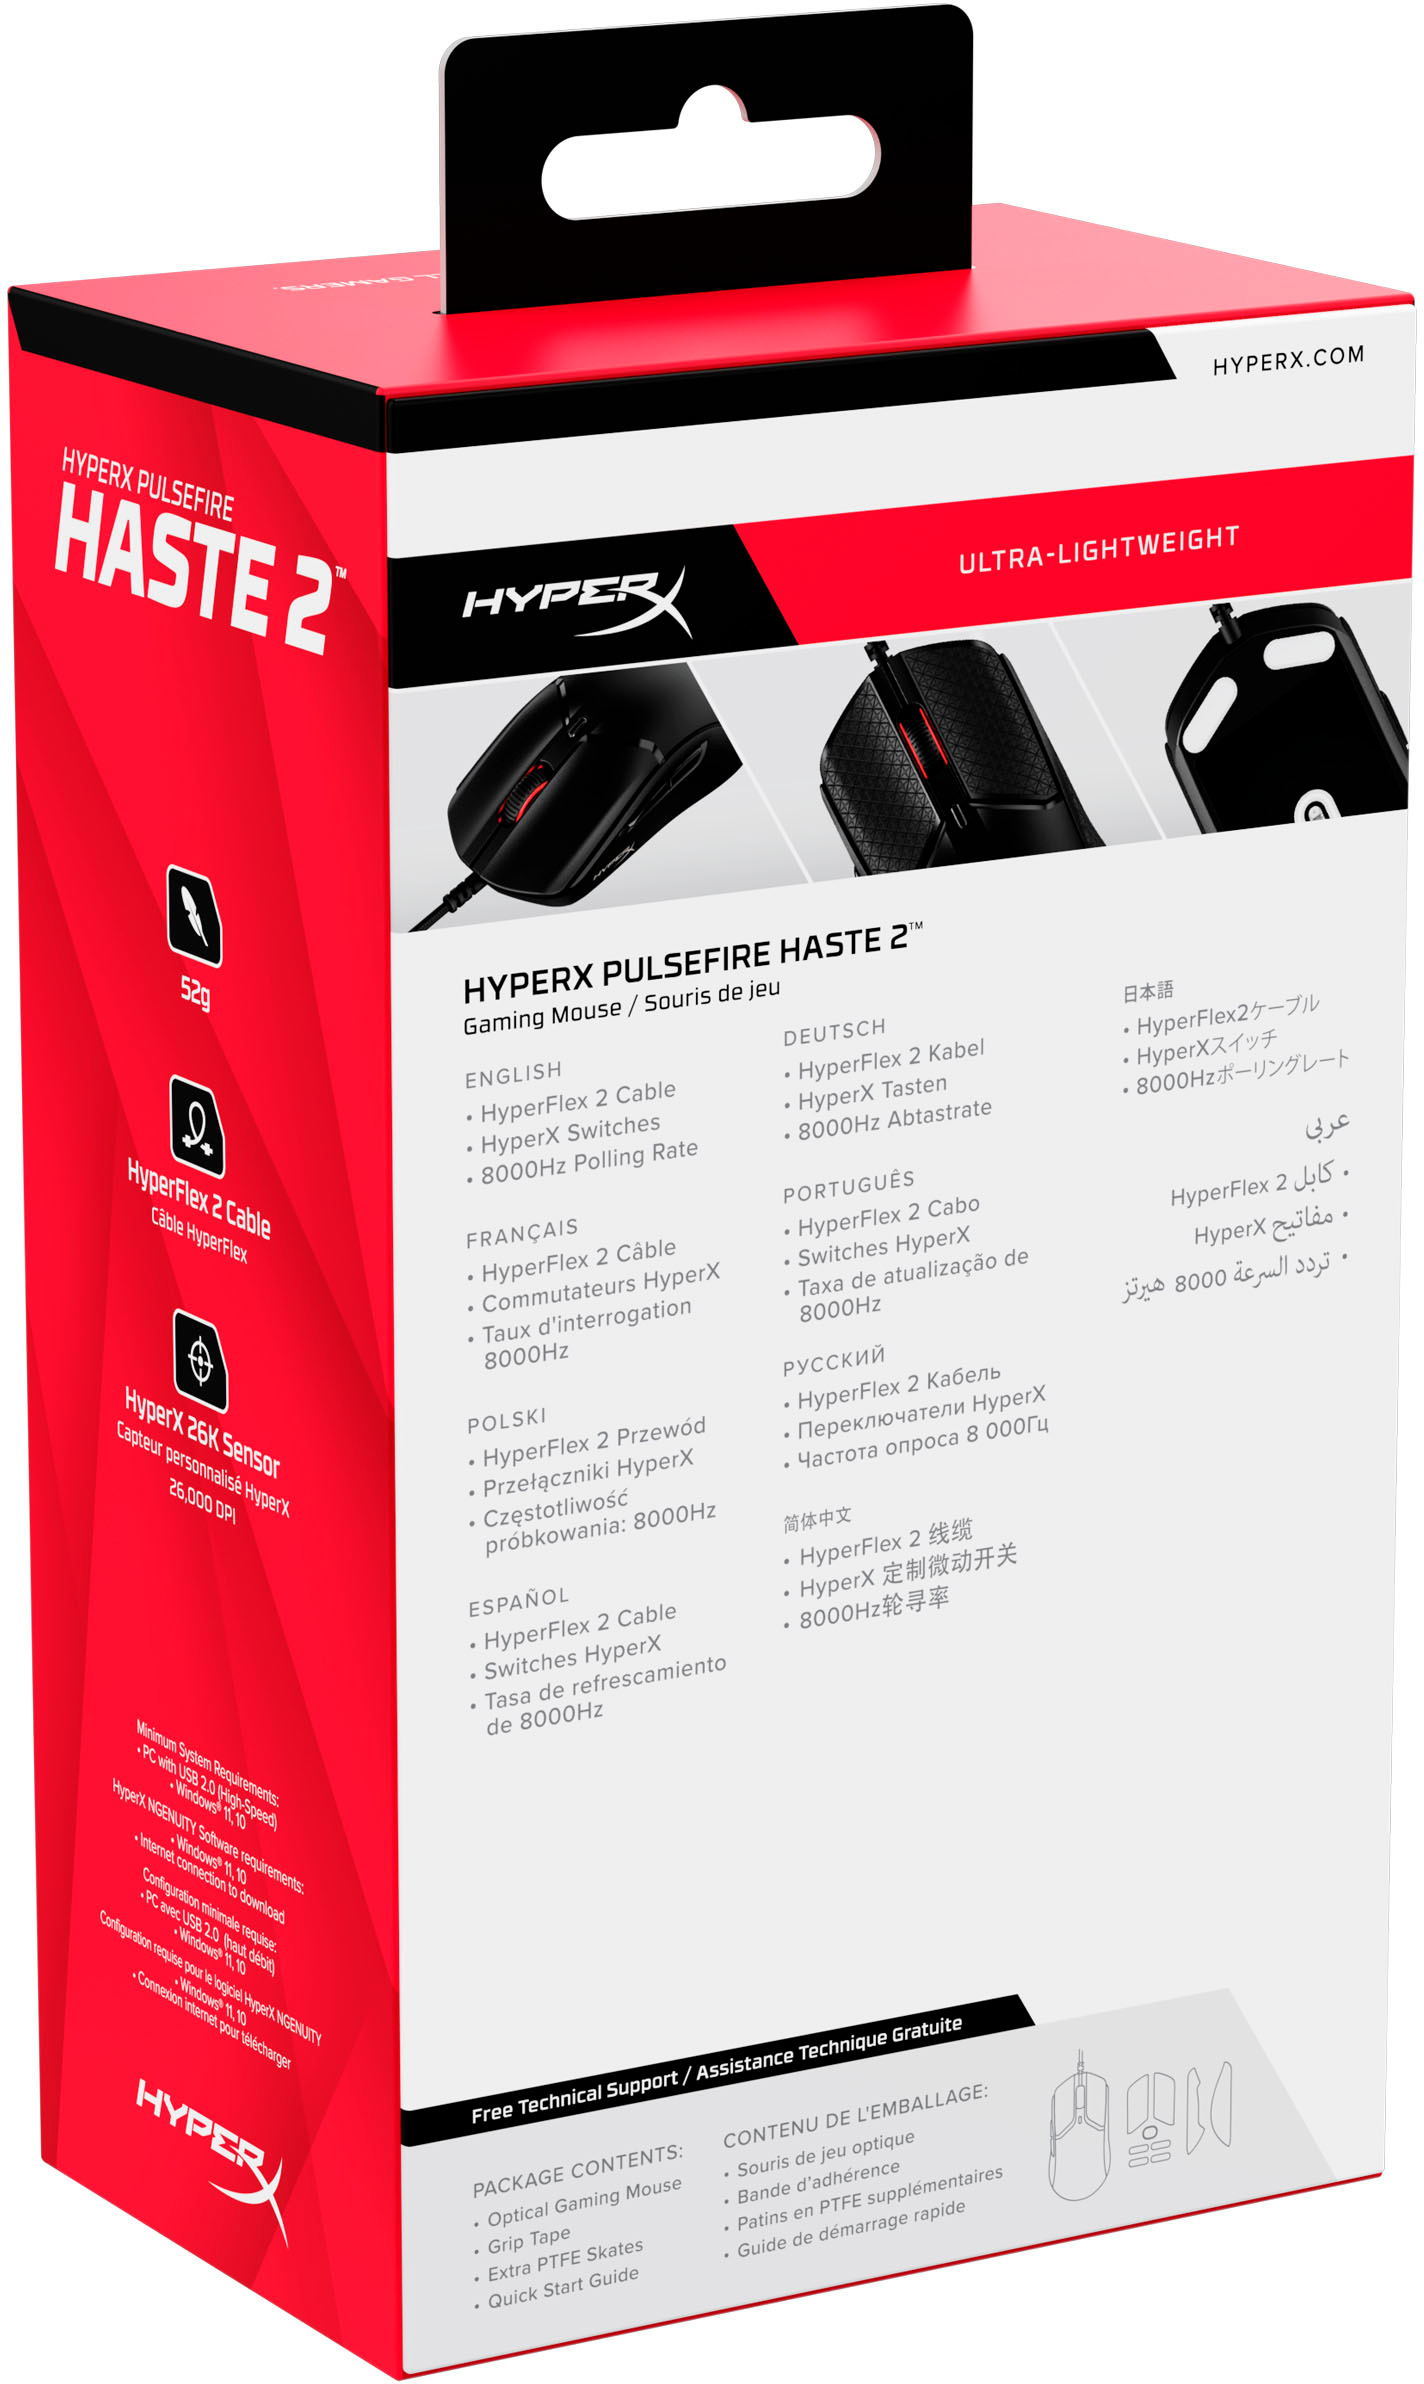 Buy HyperX Pulsefire with Lightweight Best 2 Wired RGB Black Lighting Gaming Haste 6N0A7AA - Optical Mouse